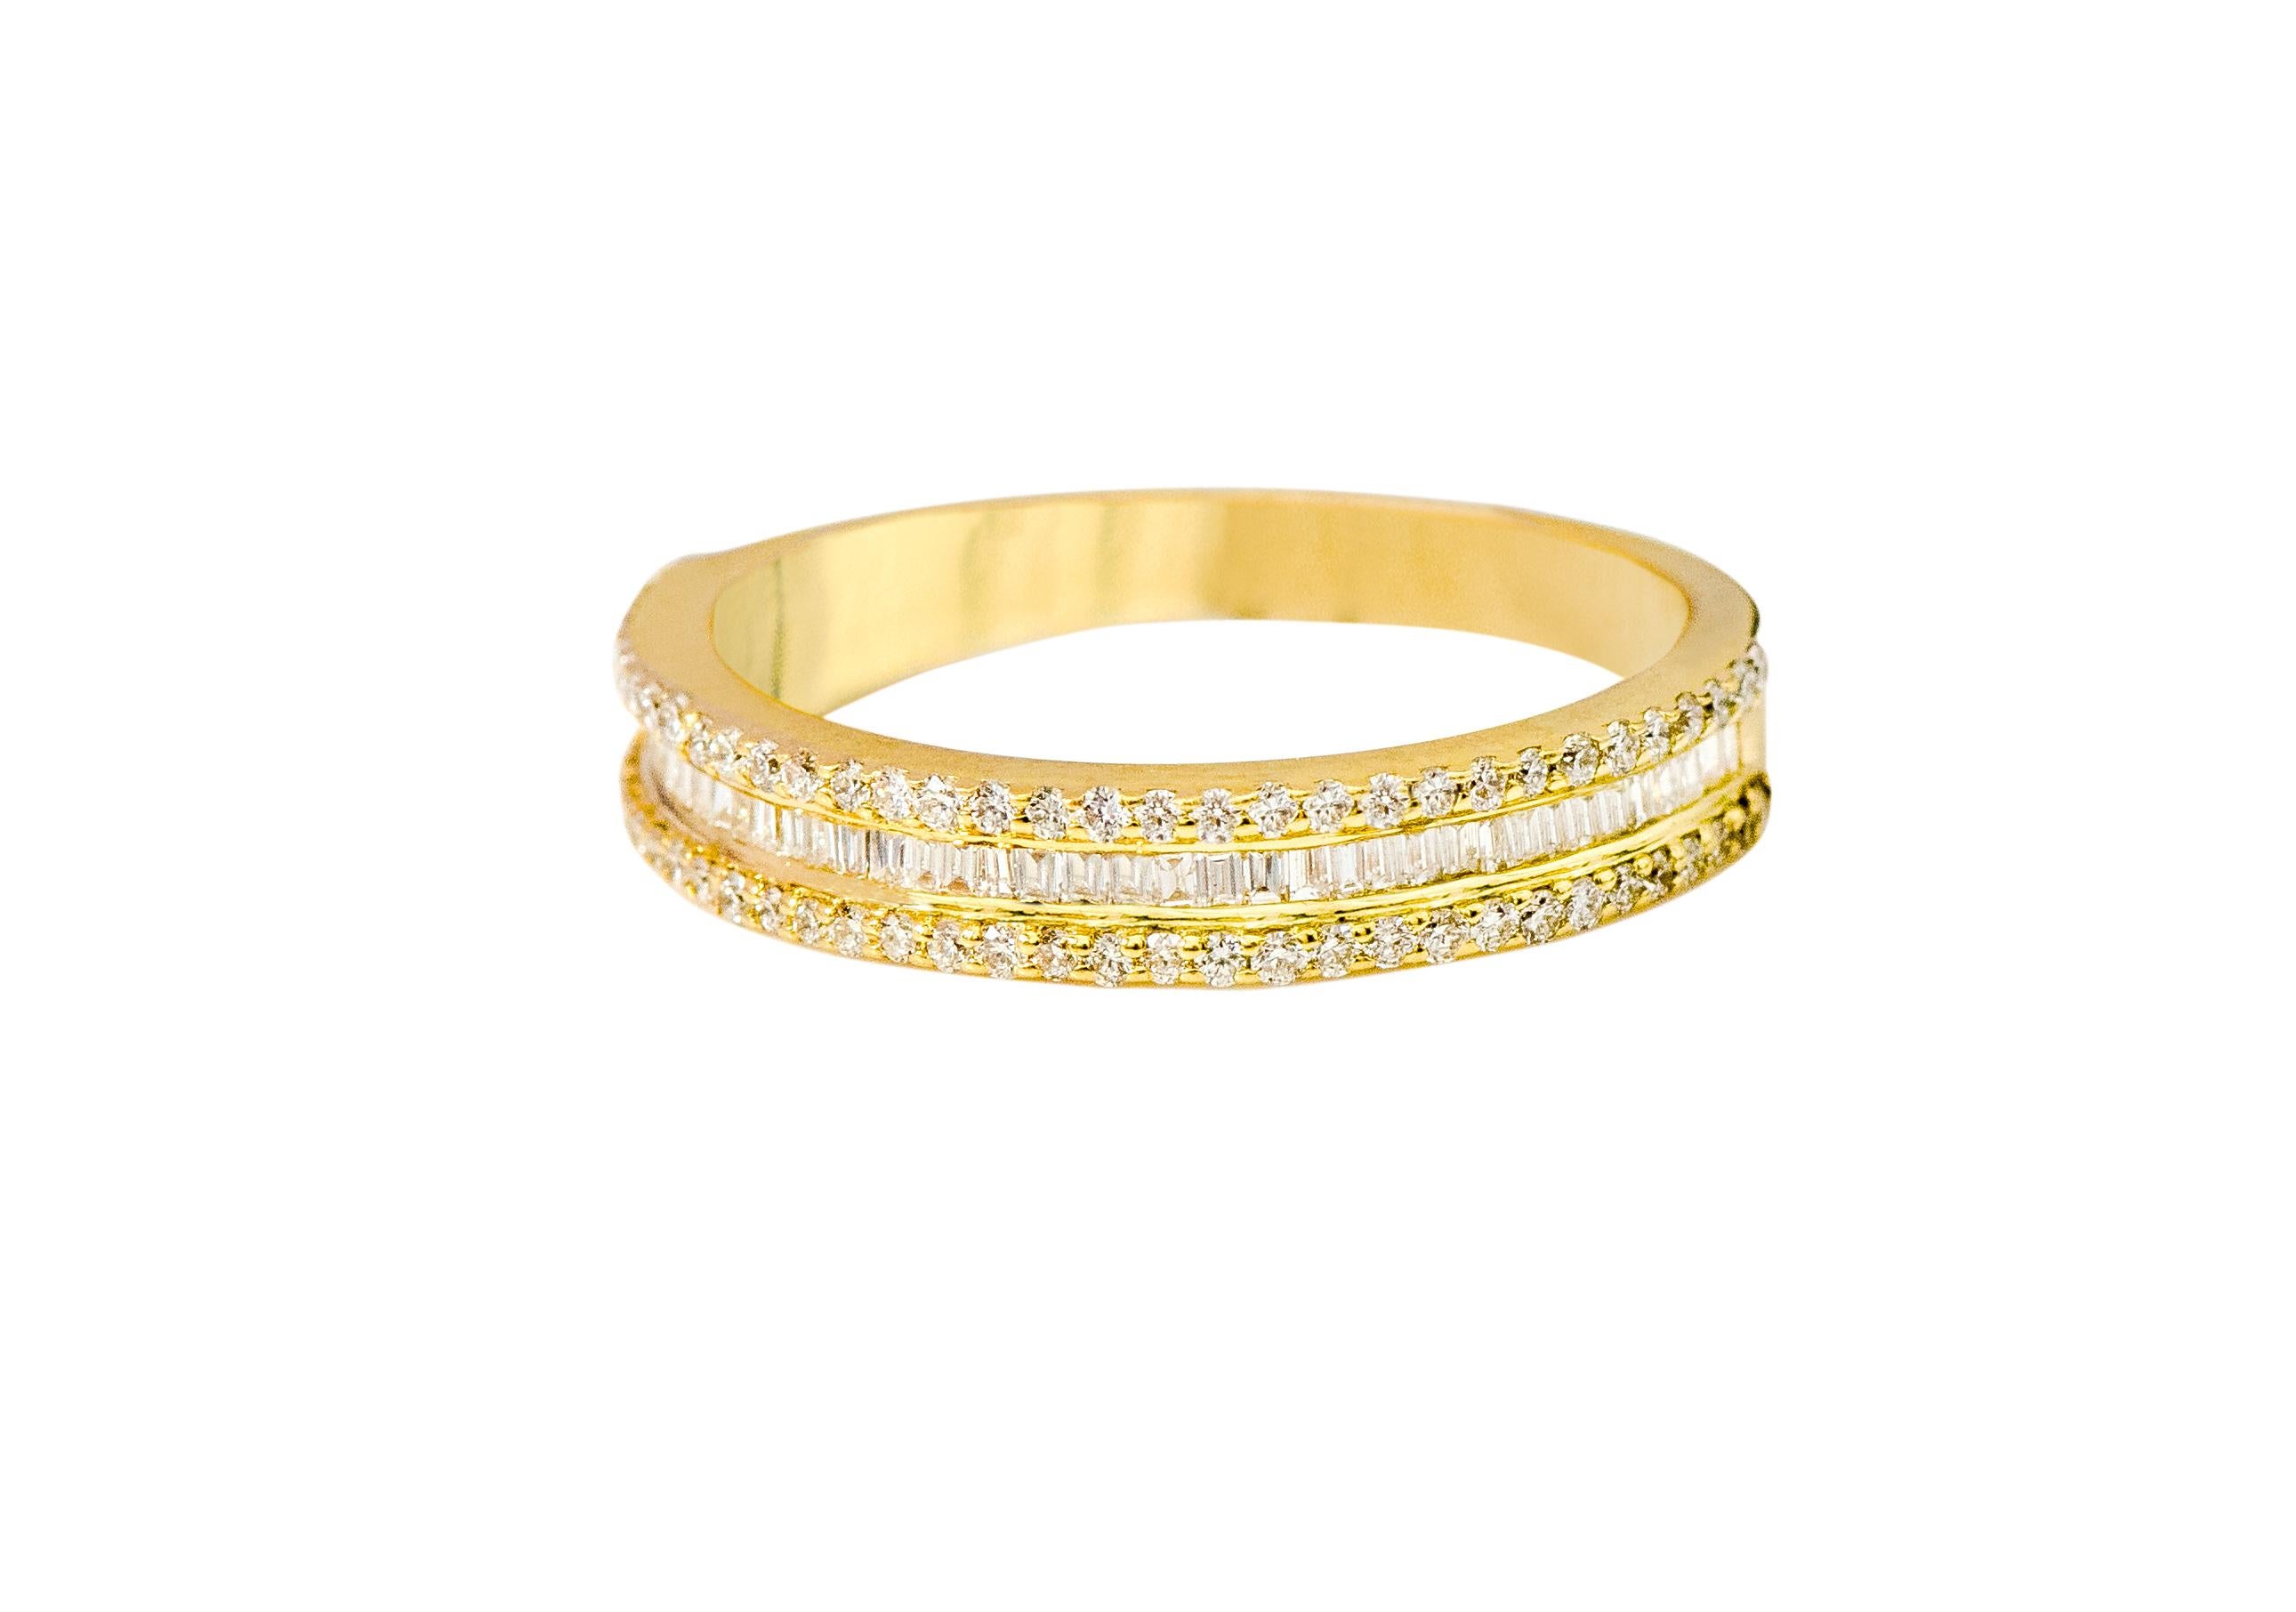 18 Karat Yellow Gold 0.89 Carat Diamond Eternity Half-Band Ring

This enchanting diamond half-band is distinctive. The perfectly cut and matched baguette cut diamonds in closed bezel setting are incorporated masterfully within an equivalent layer of